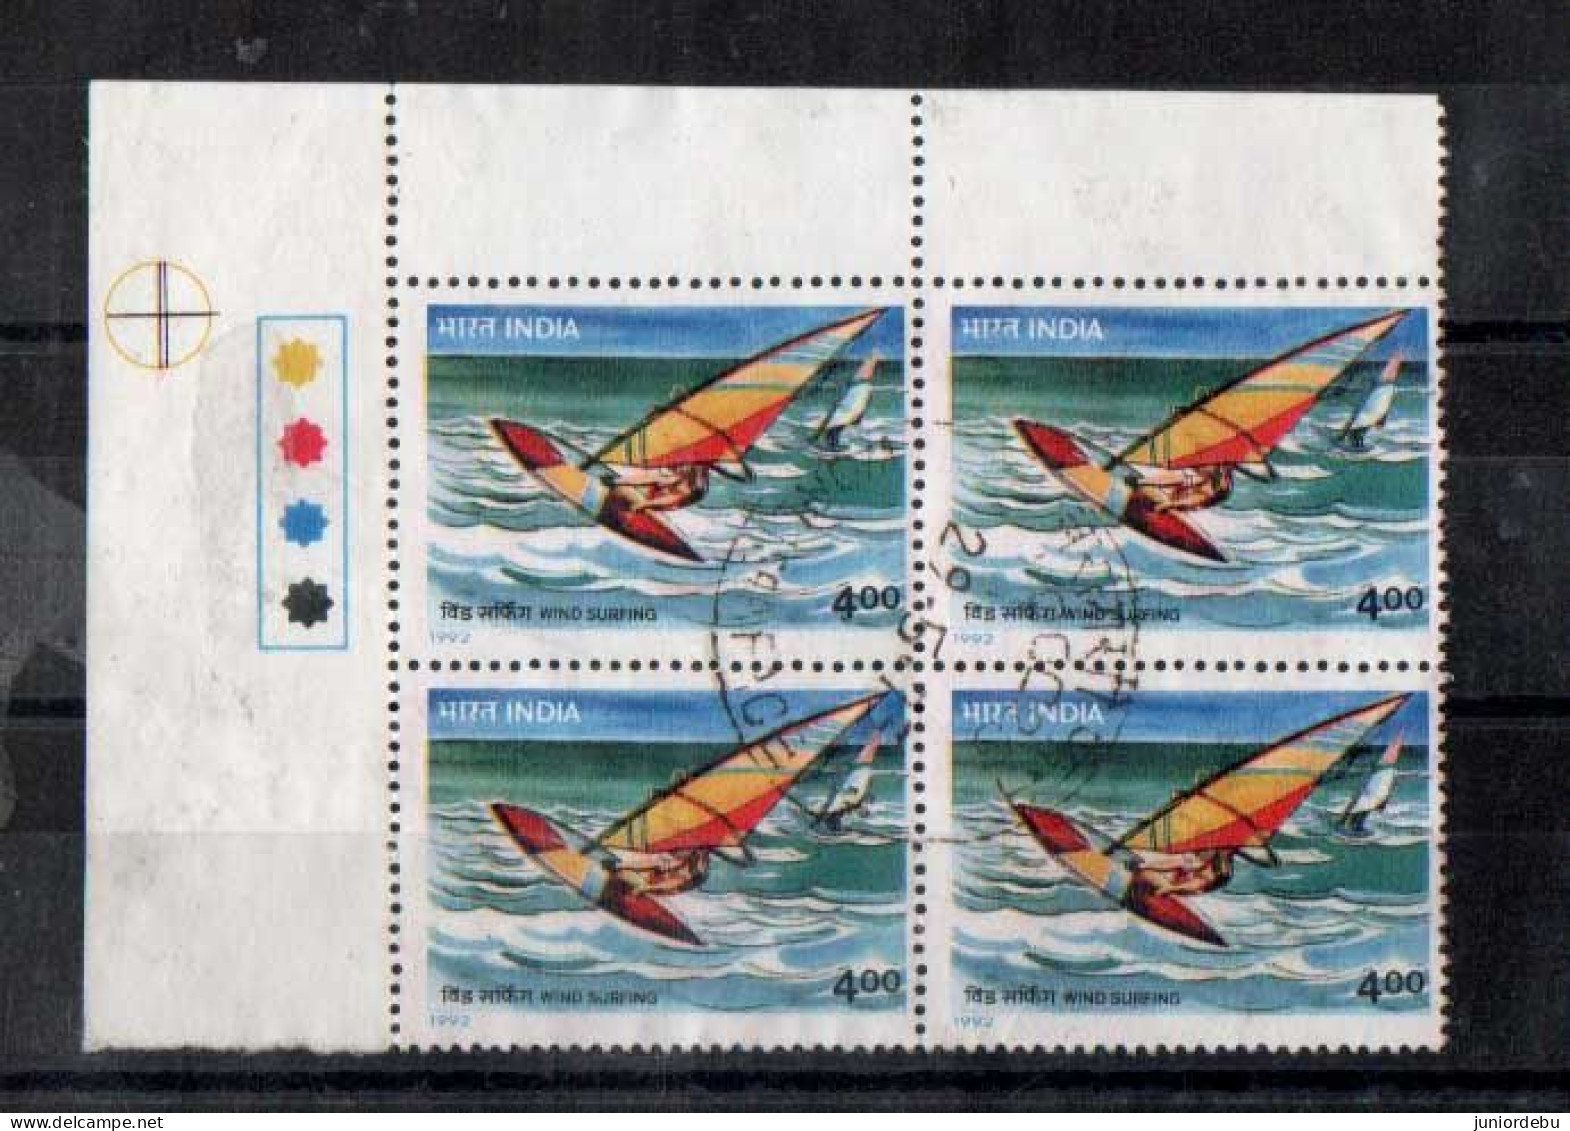 India - 1992 - Adventure Sport - Wind Surfing - Block Of 4 - Fine Used. - Used Stamps